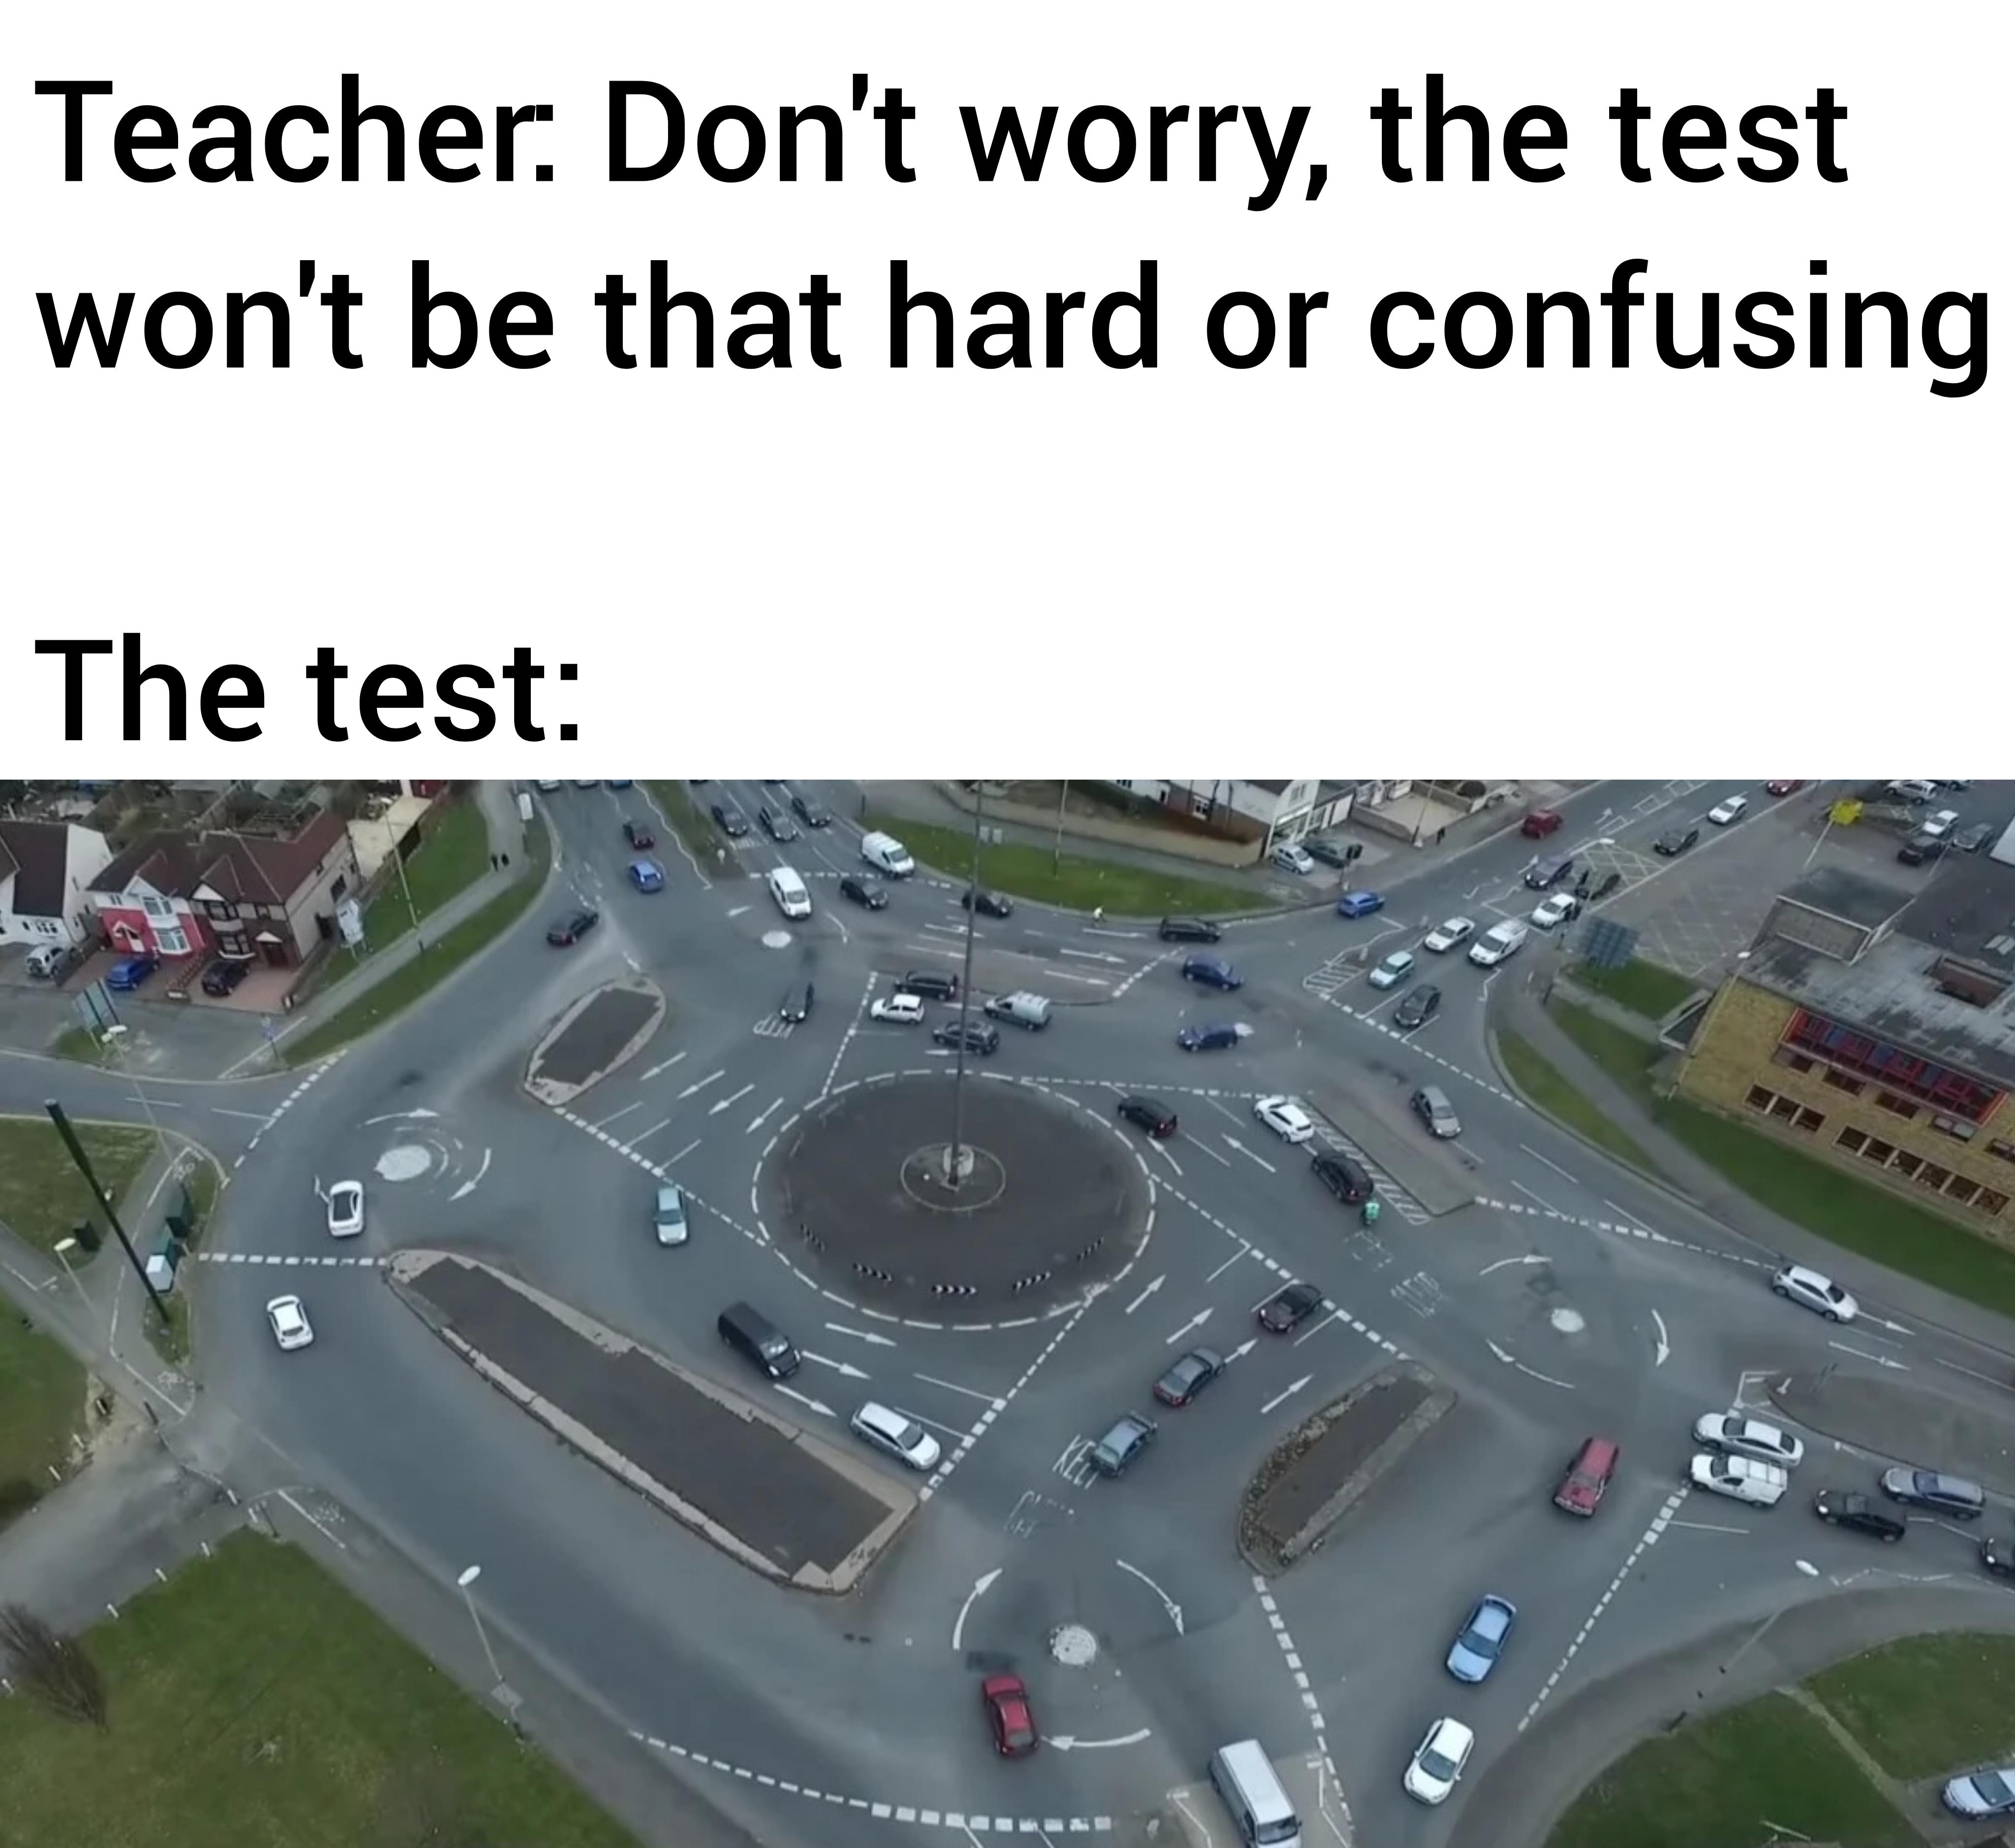 monday morning randomness - urban design - Teacher Don't worry, the test won't be that hard or confusing The test Land